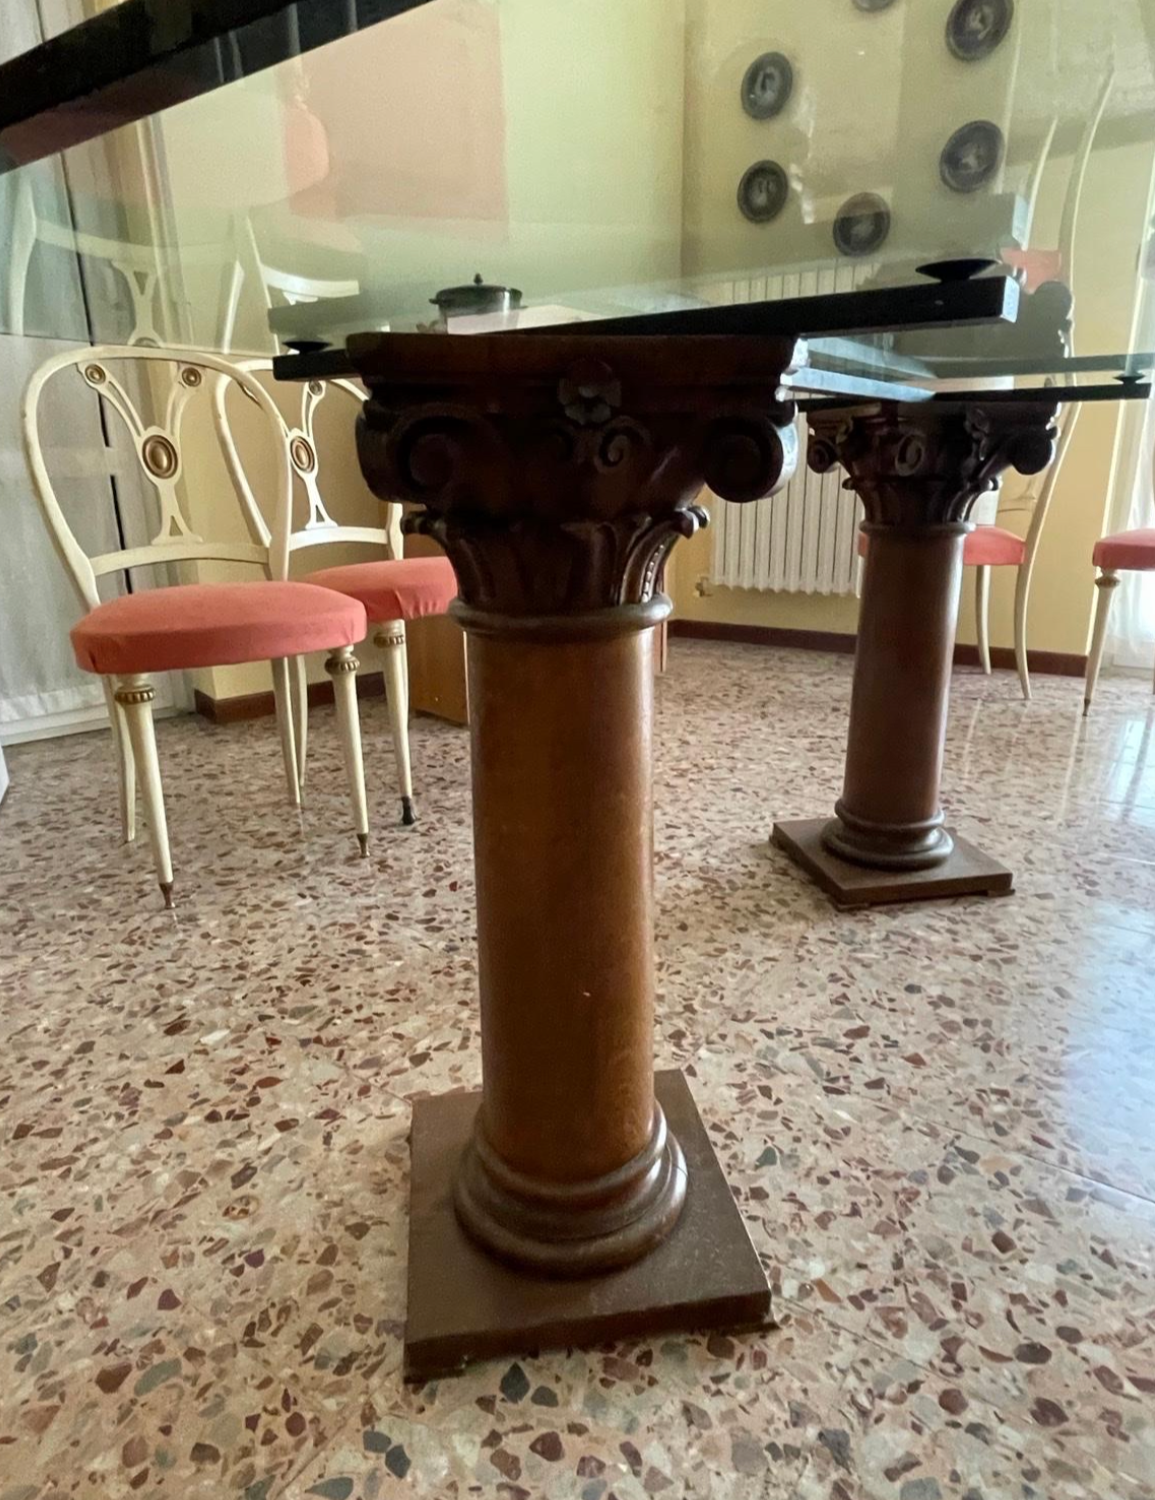 Crystal table with ancient wooden columns